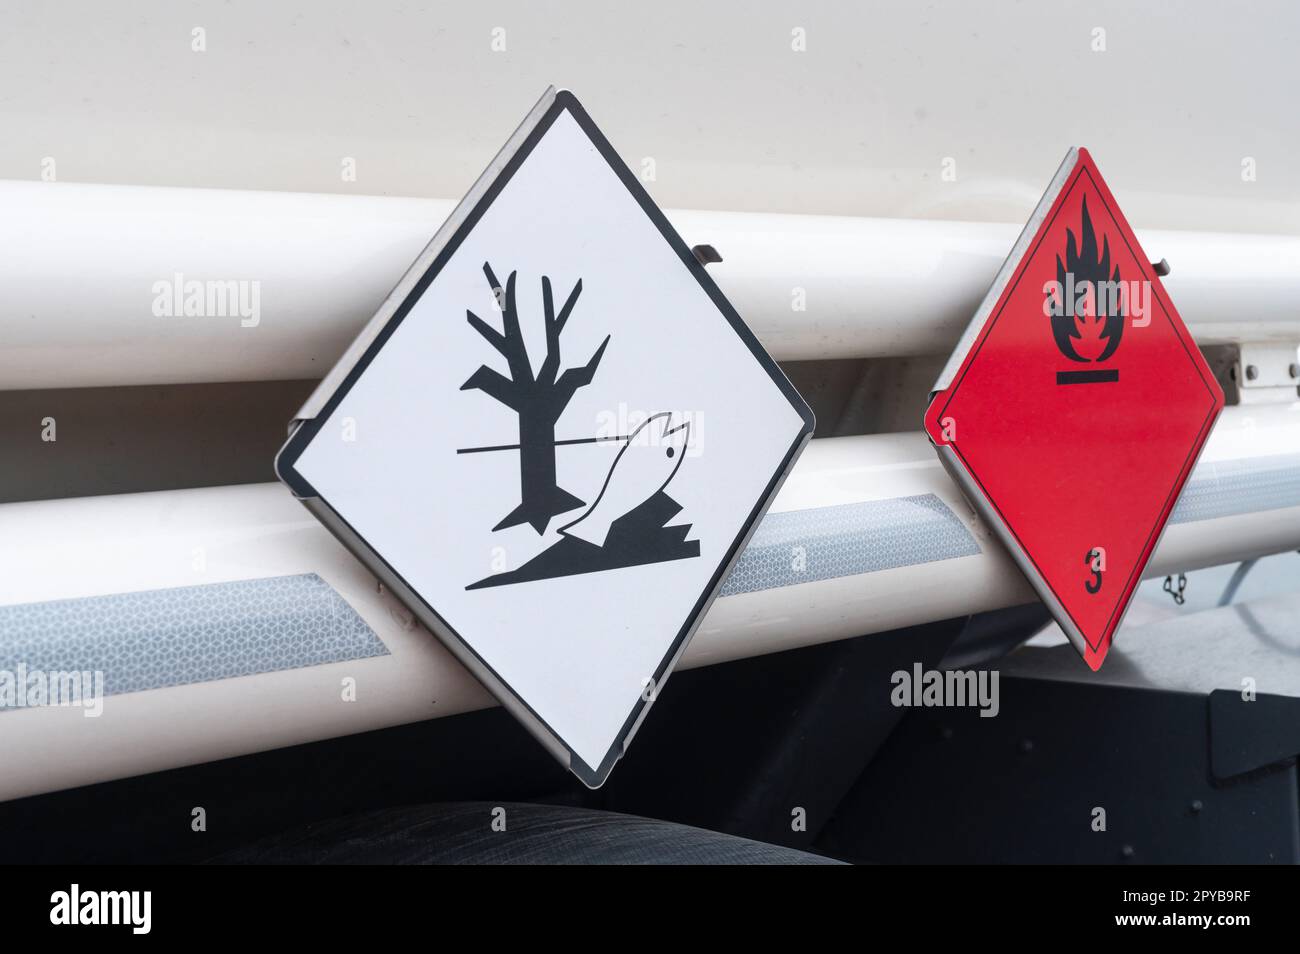 Signs for the dangerous goods classes , here for environmentally hazardous and flammable liquid substances Stock Photo